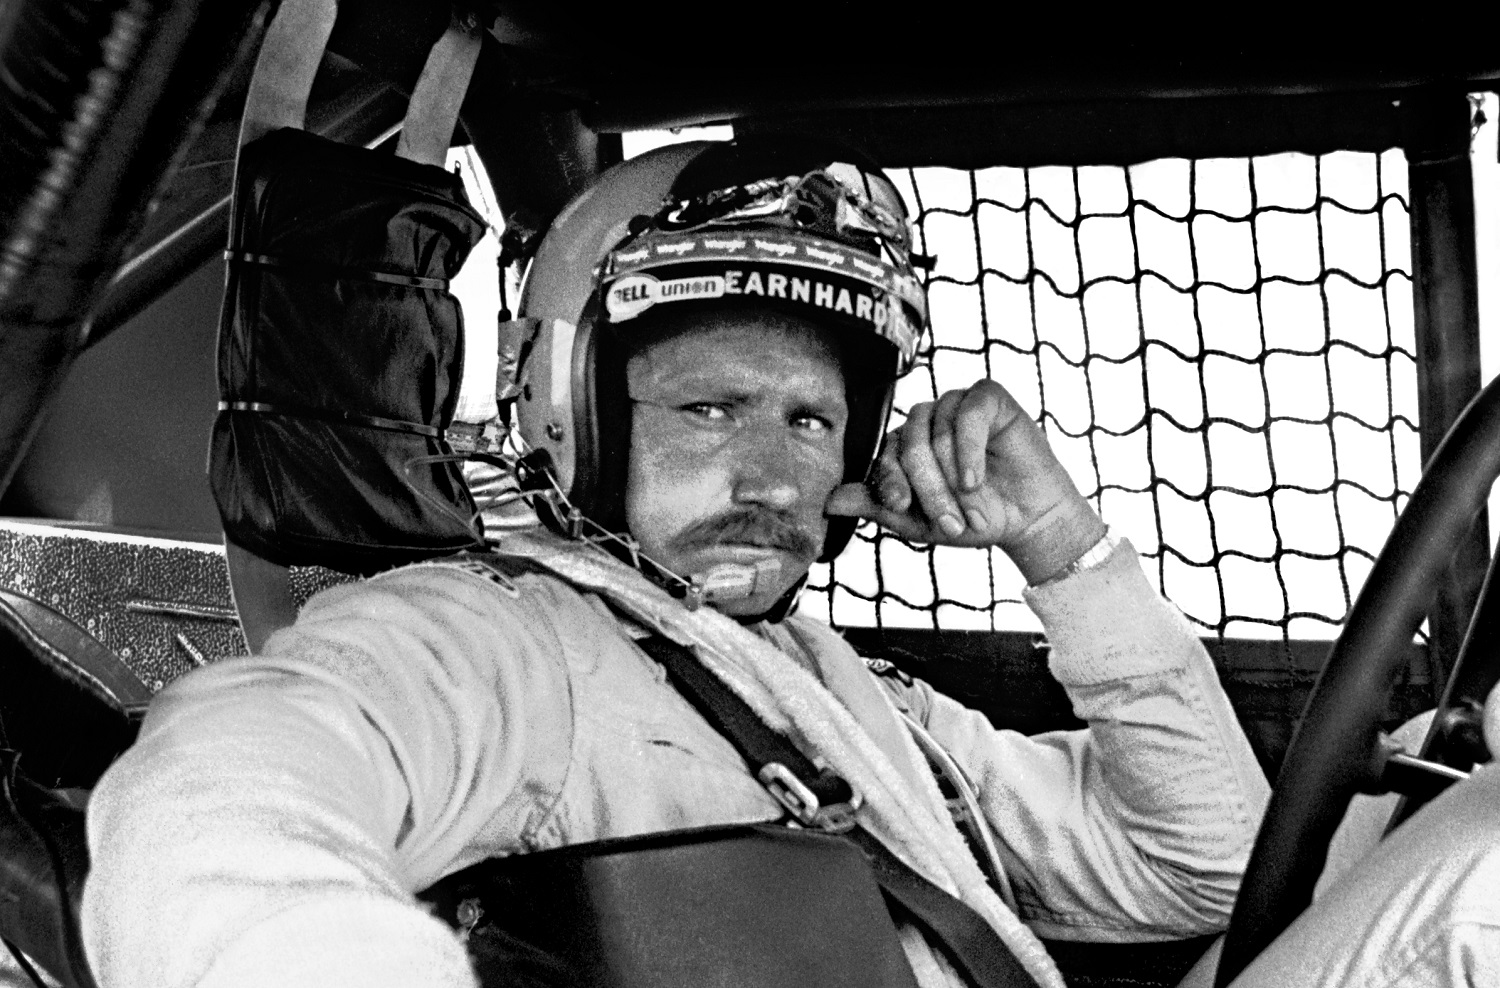 NASCAR driver Dale Earnhardt Sr. sits in his car prior to the 1981 Firecracker 400 NASCAR race at Daytona International Speedway.